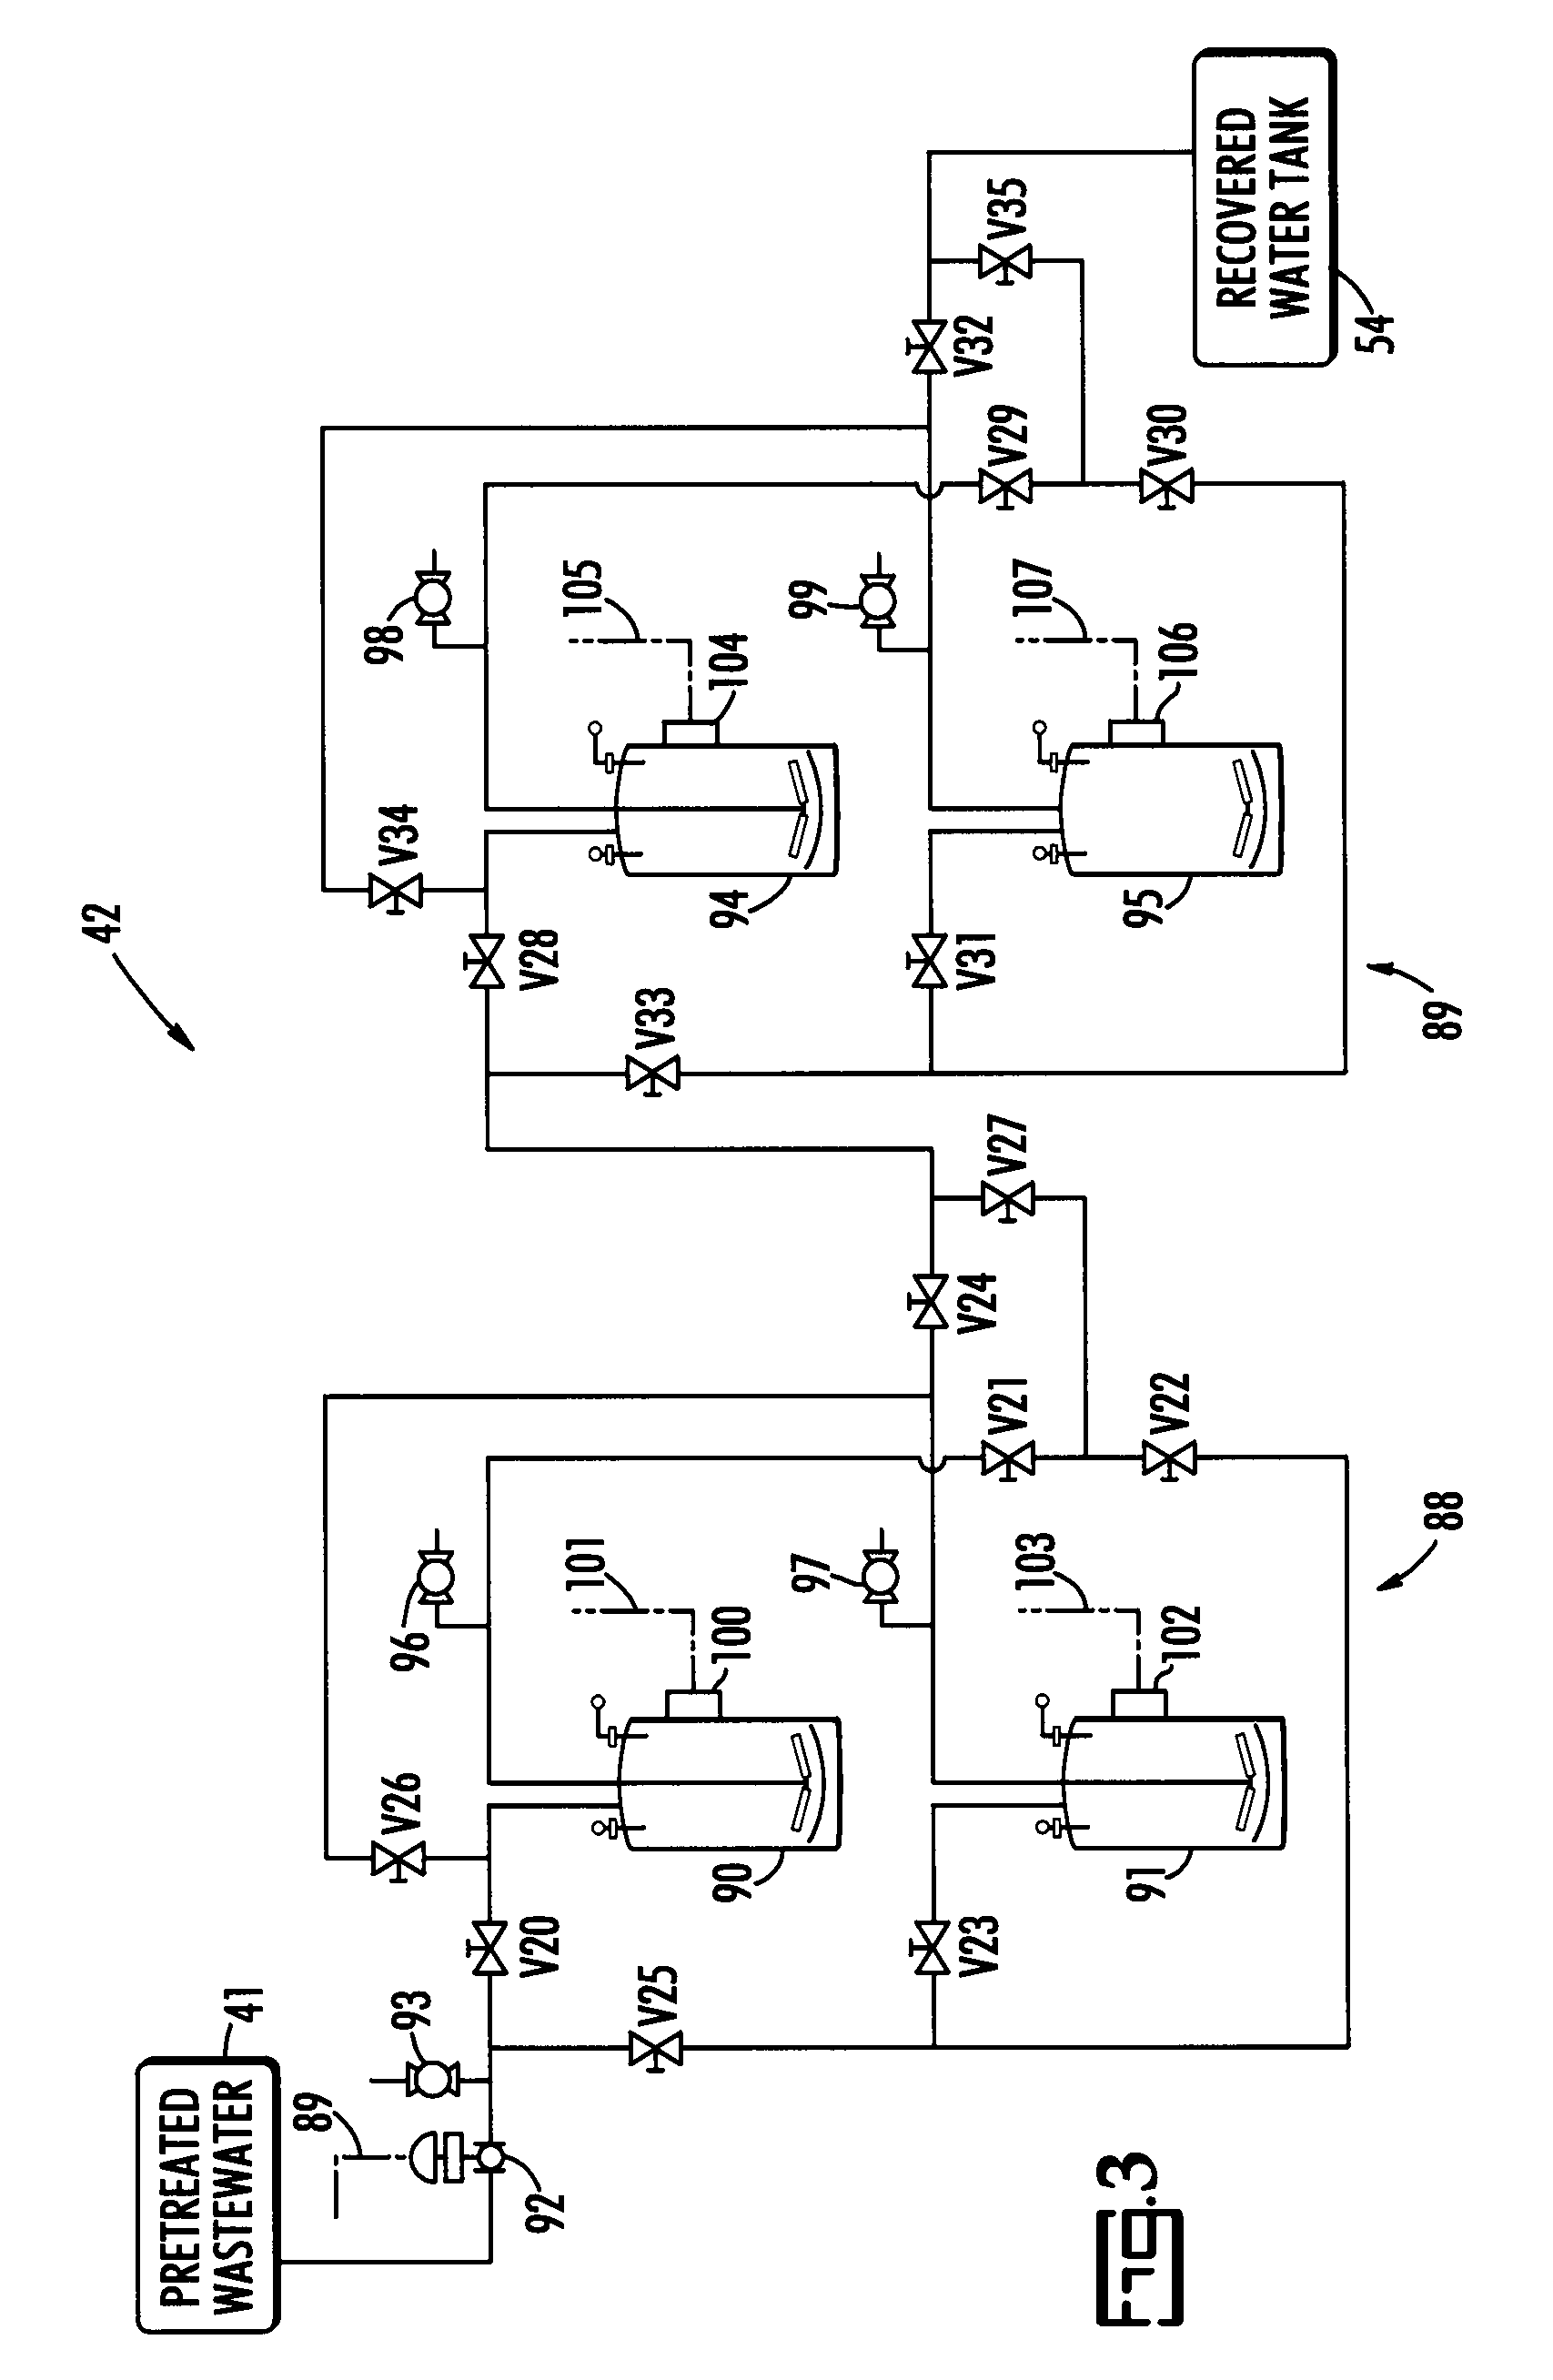 Process for treating radioactive waste water to prevent overloading demineralizer systems